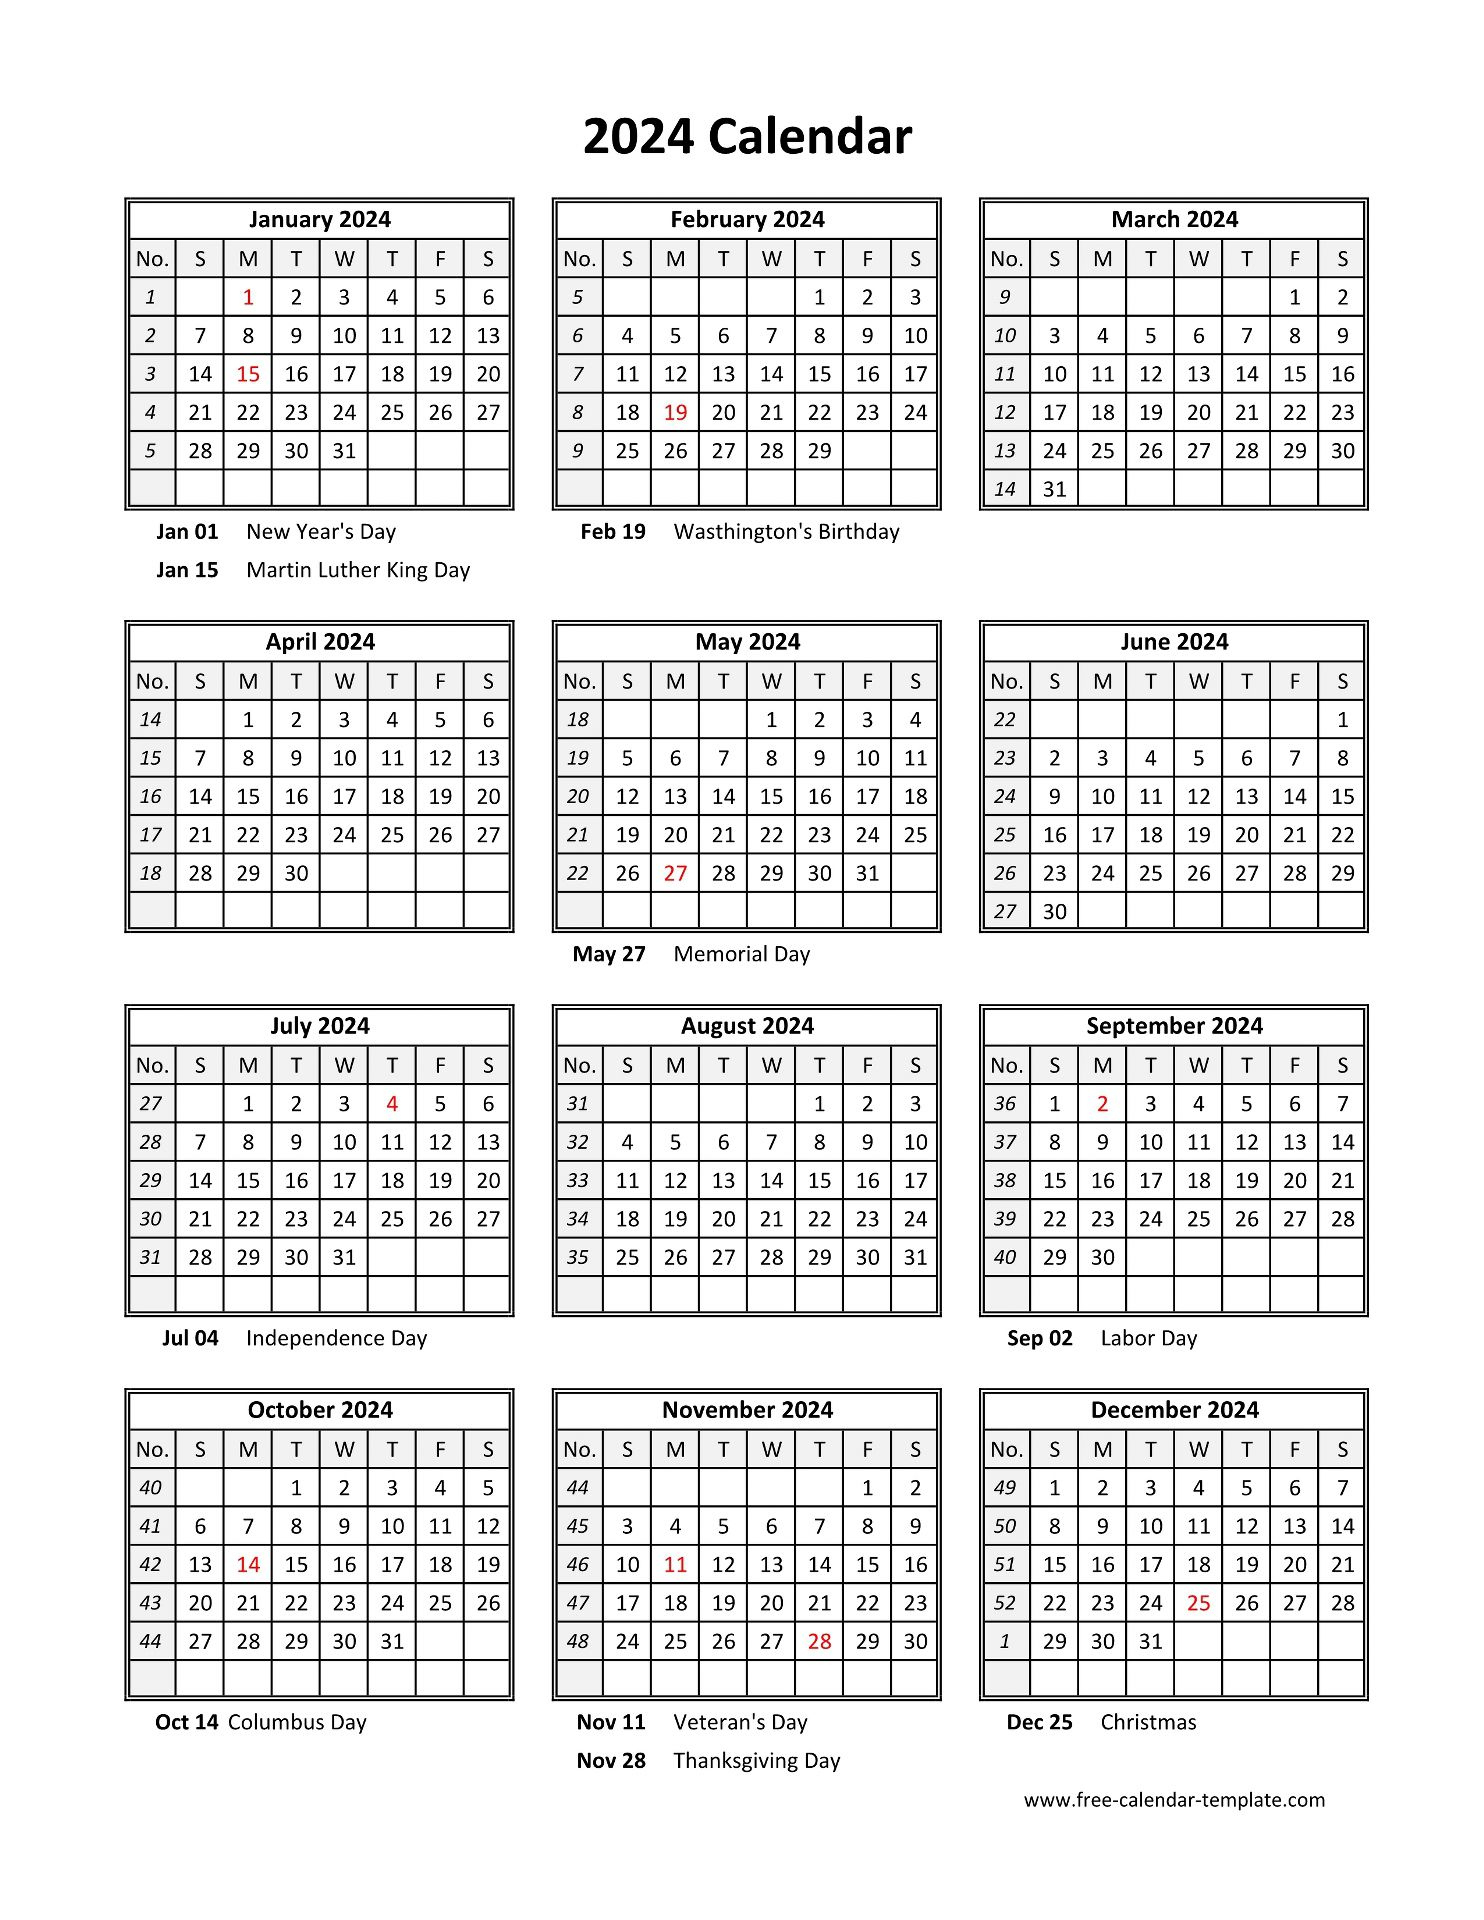 Yearly Printable Calendar 2024 With Holidays | Free-Calendar | Printable Calendar 2024 Free Printable Pdf